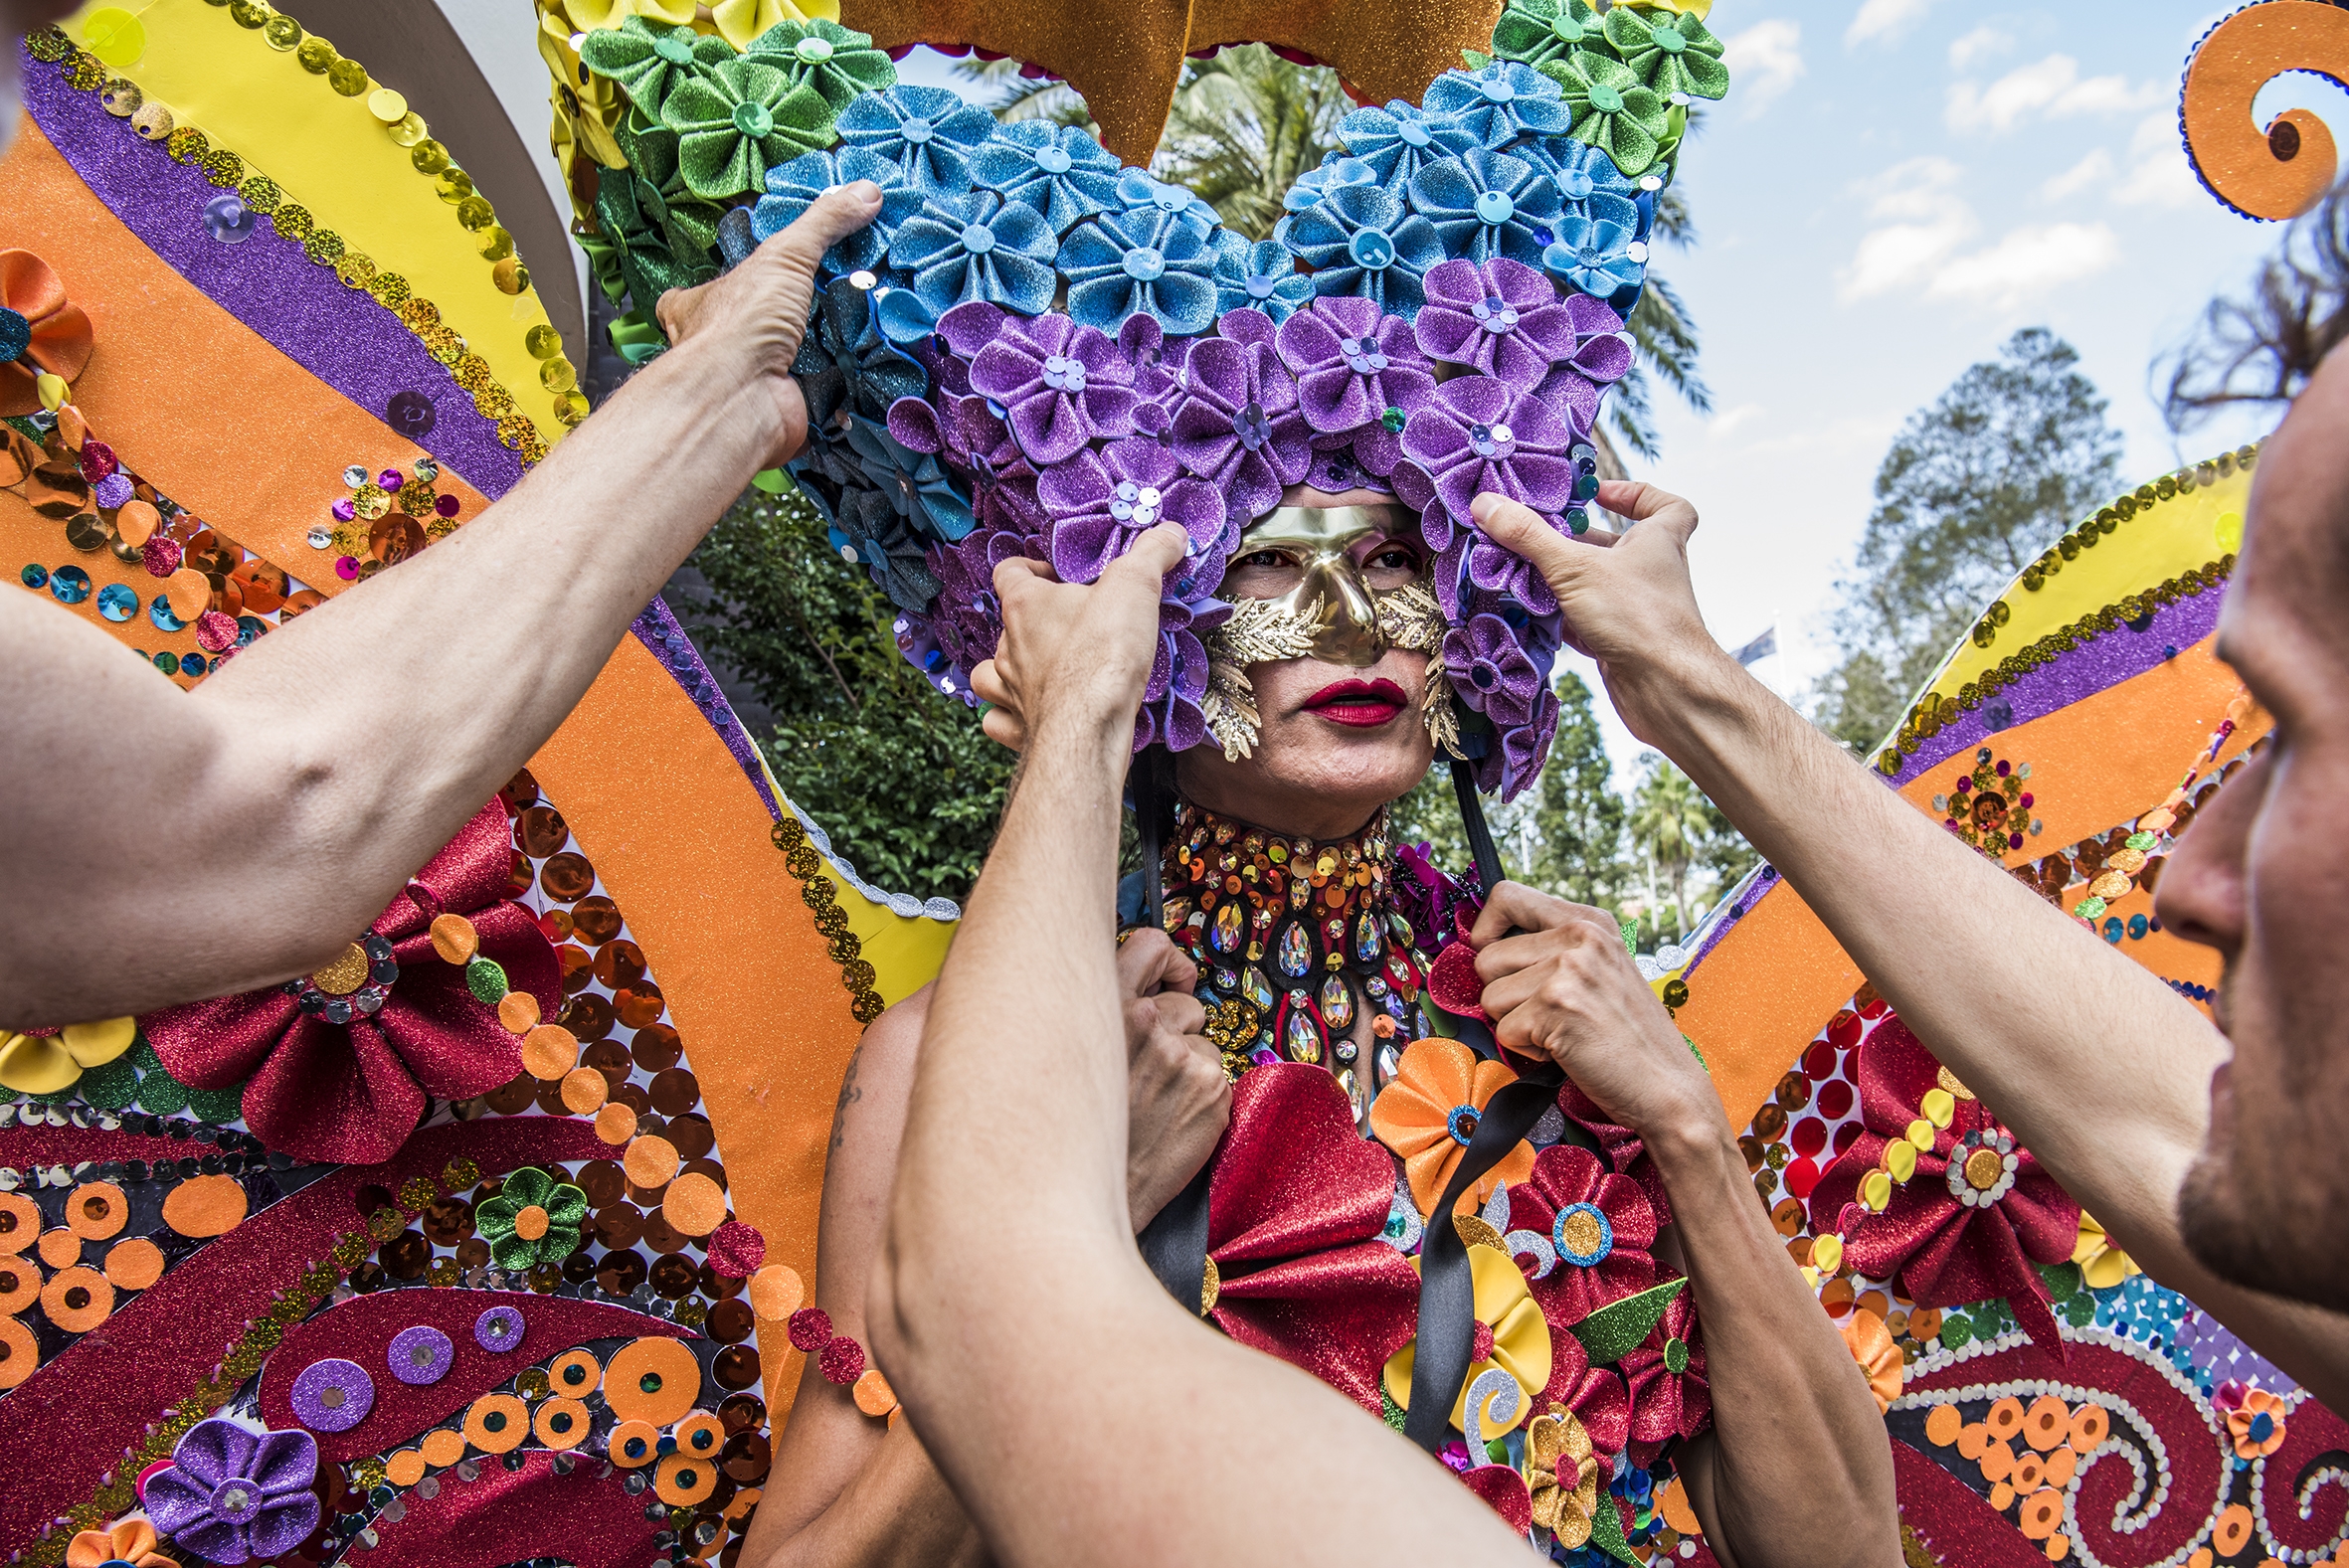 Koranis (Micky) Weerachaiyong has designed his own amazing outfit for Sydney’s Gay and Lesbian Mardi Gras, 6 March 2021. Photo by Steven Siewert